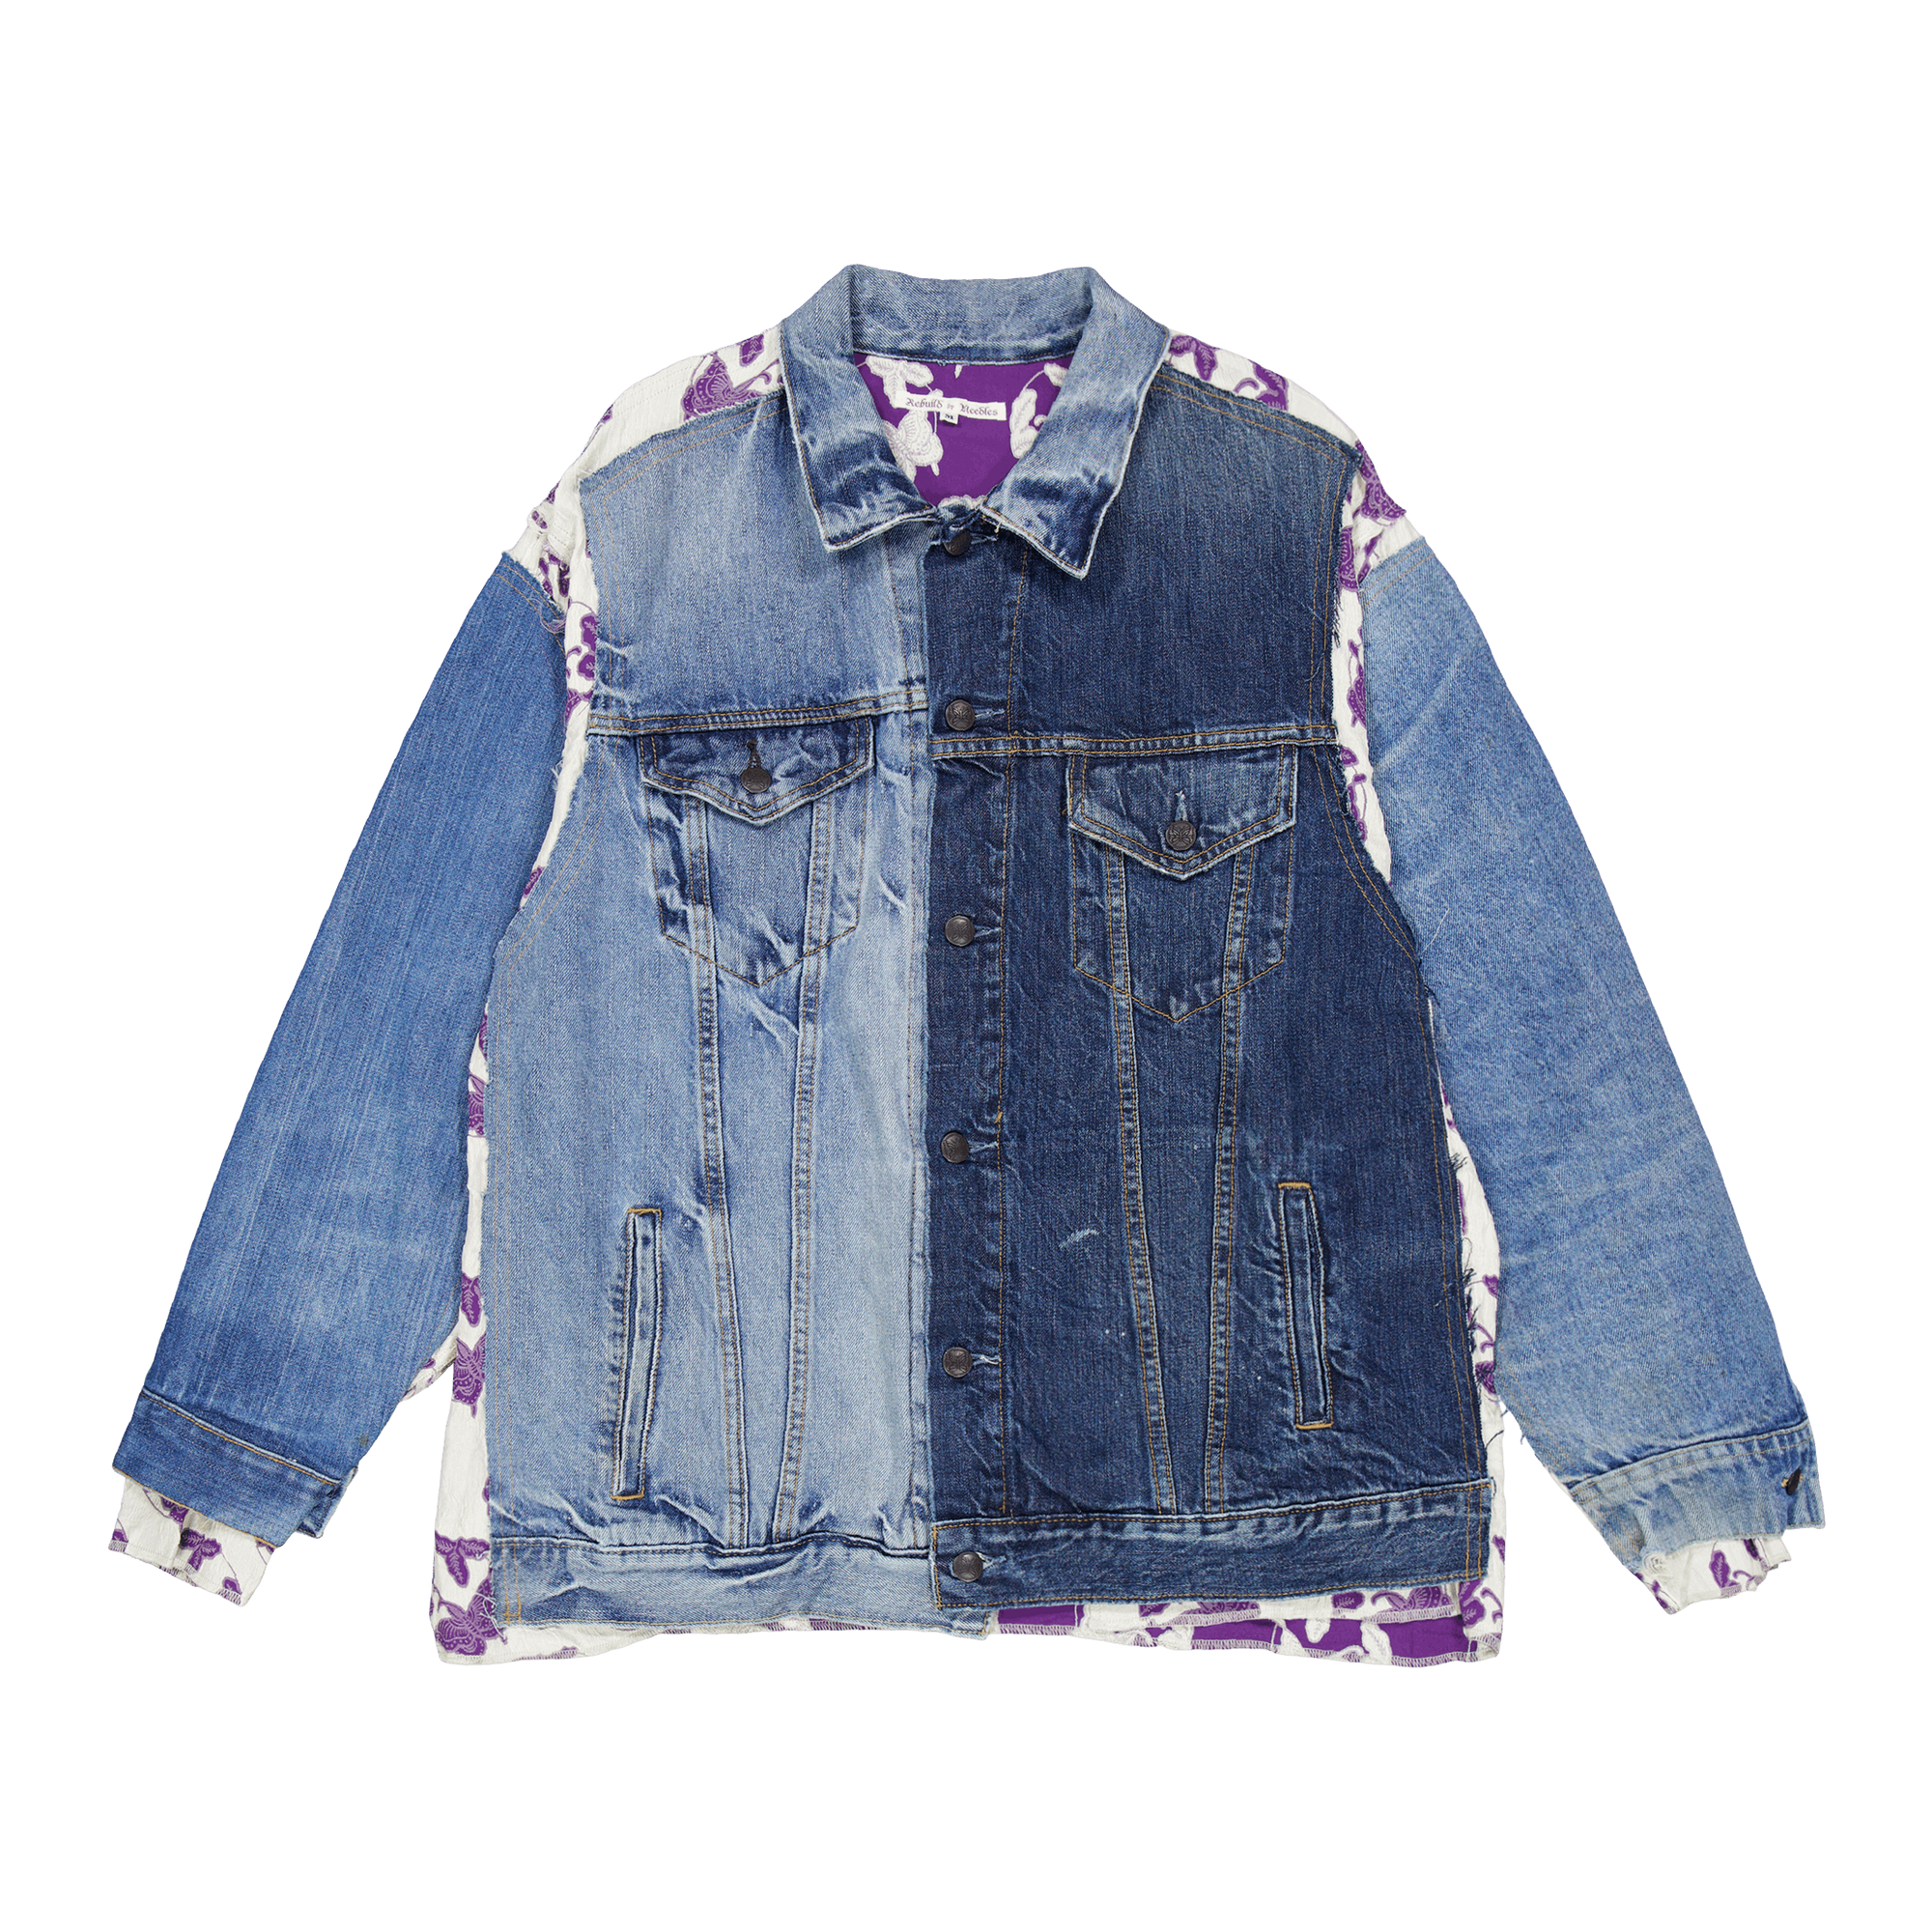 Jean Jacket -> Covered Jacket A-off White